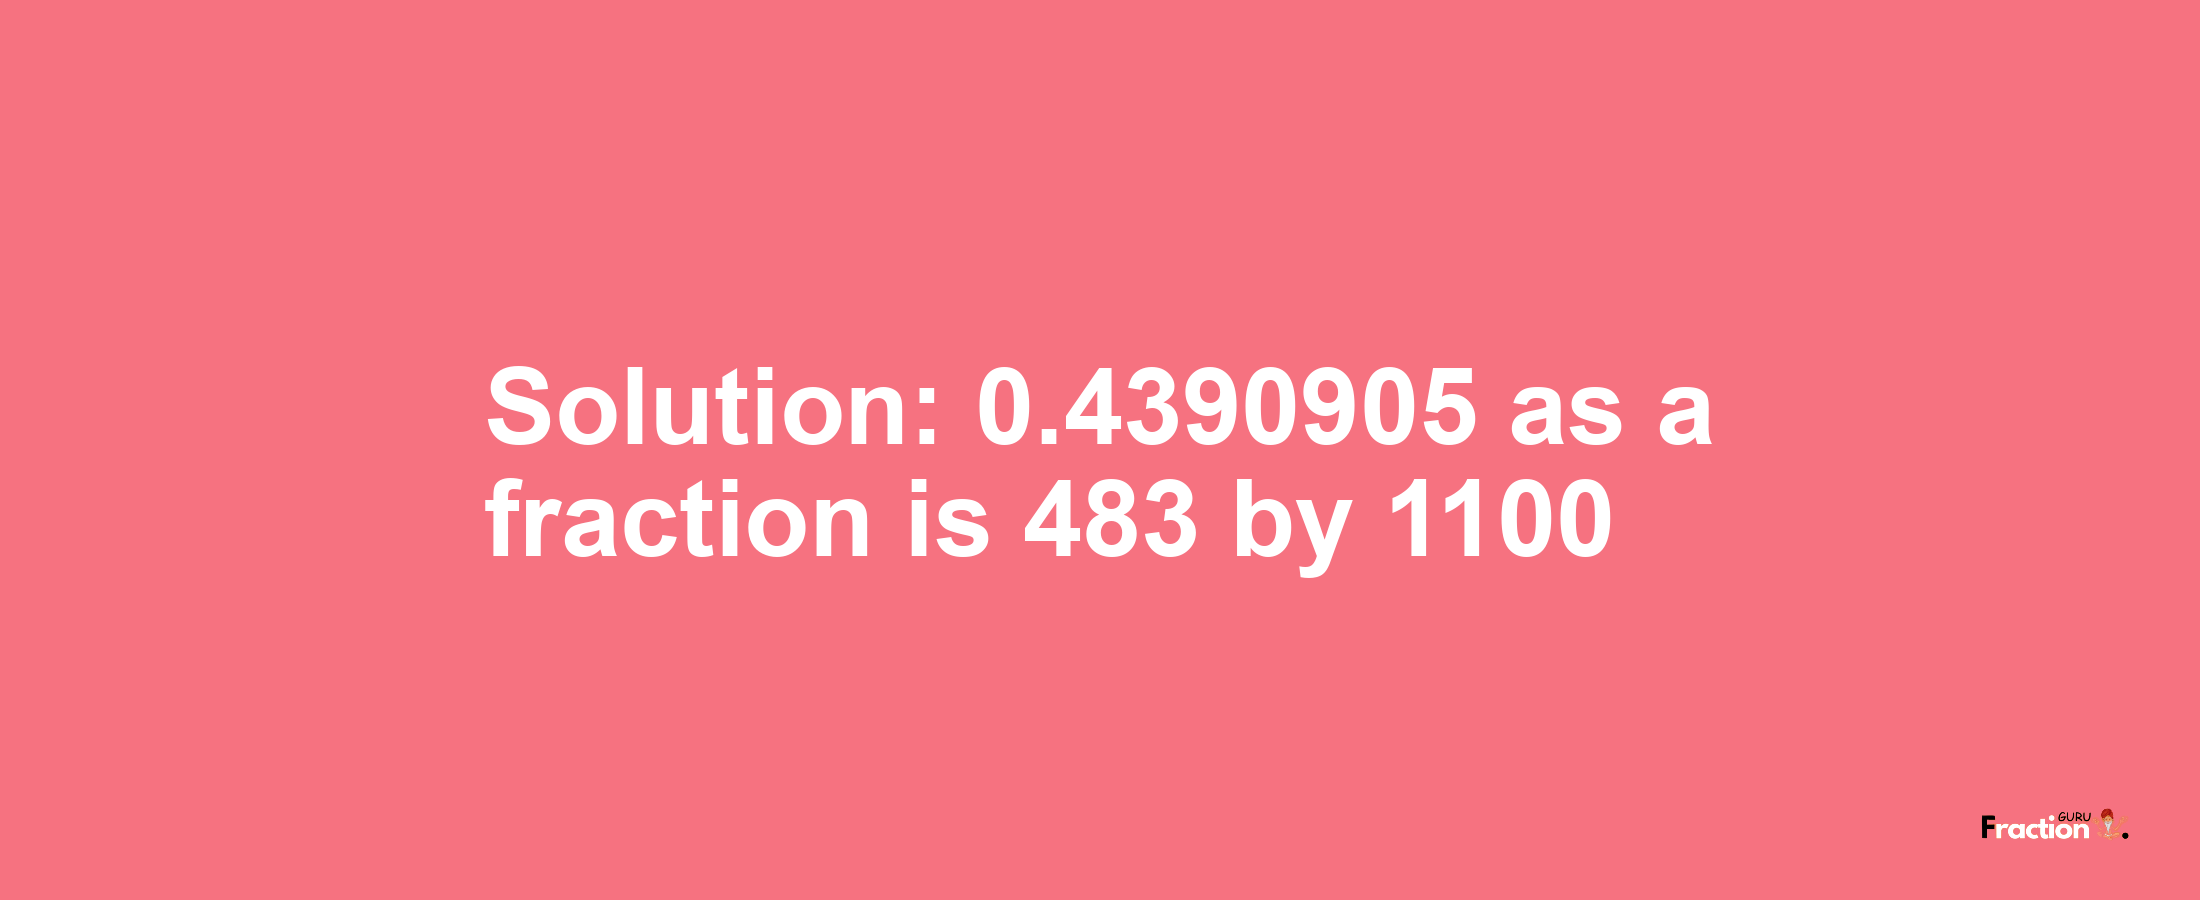 Solution:0.4390905 as a fraction is 483/1100